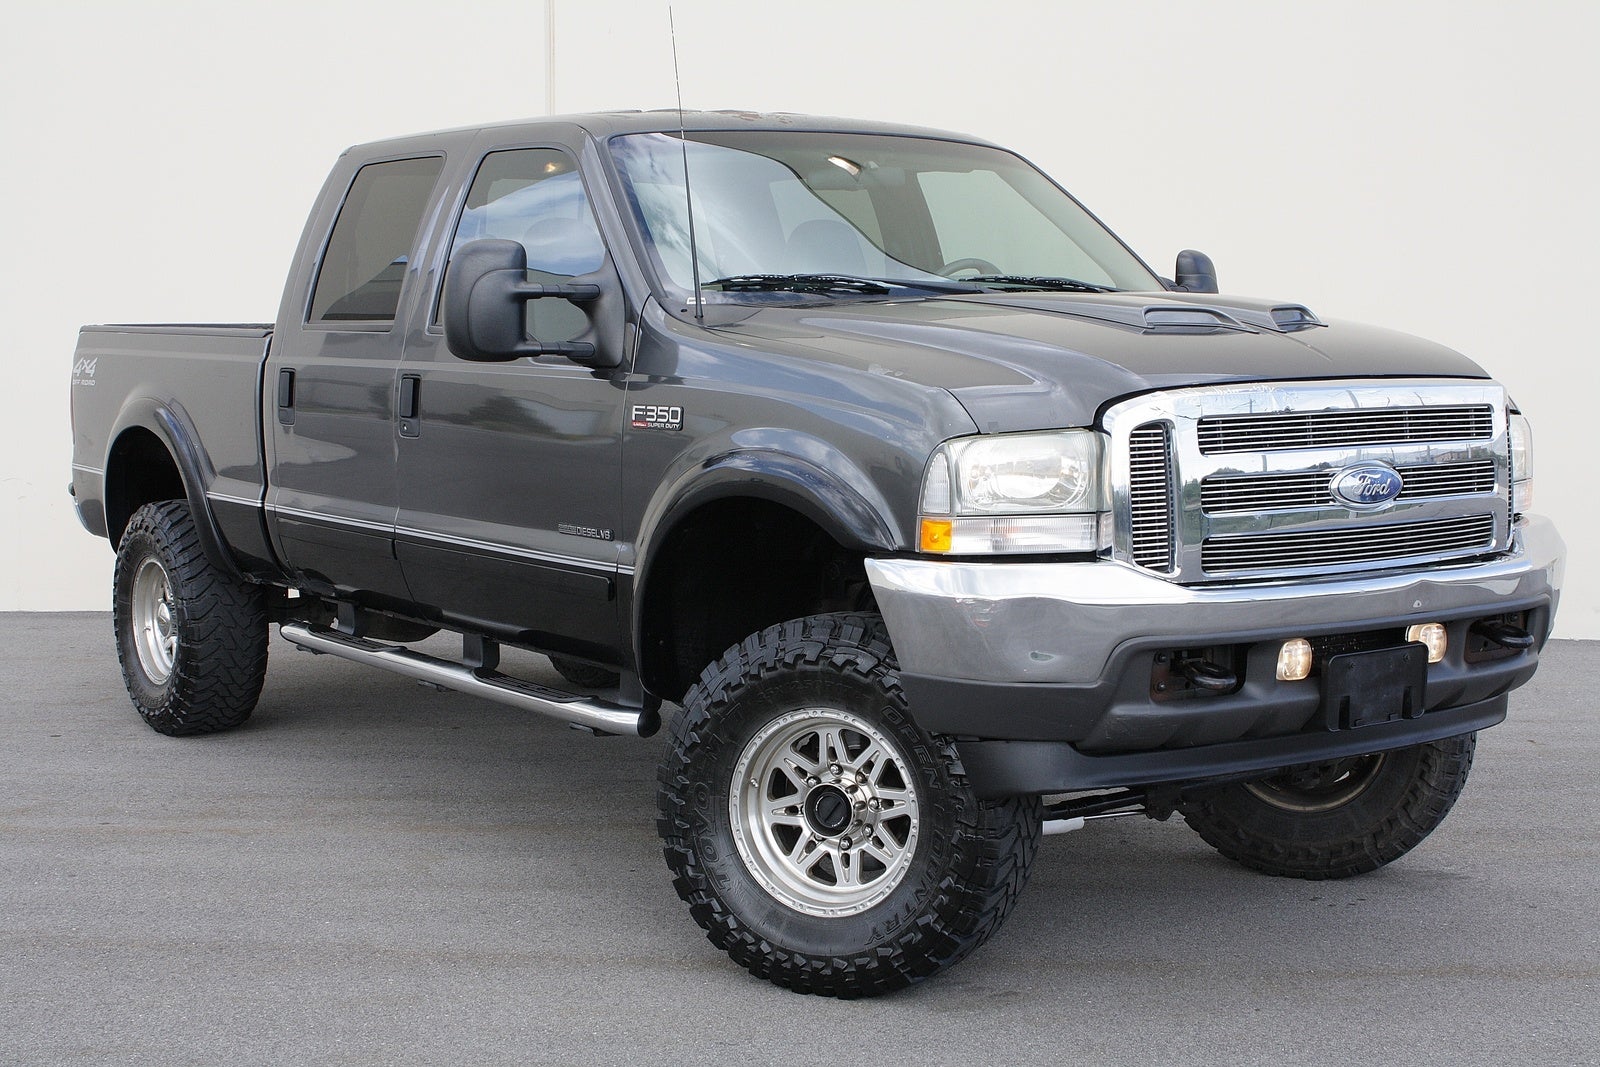 2002 Ford F-350 Super Duty - Pictures - CarGurus